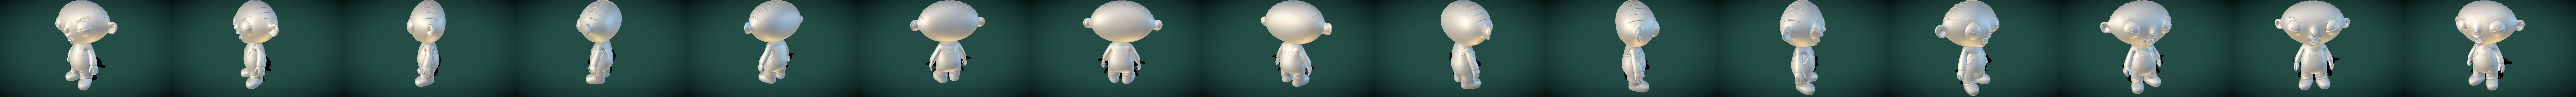 images of stewie griffin